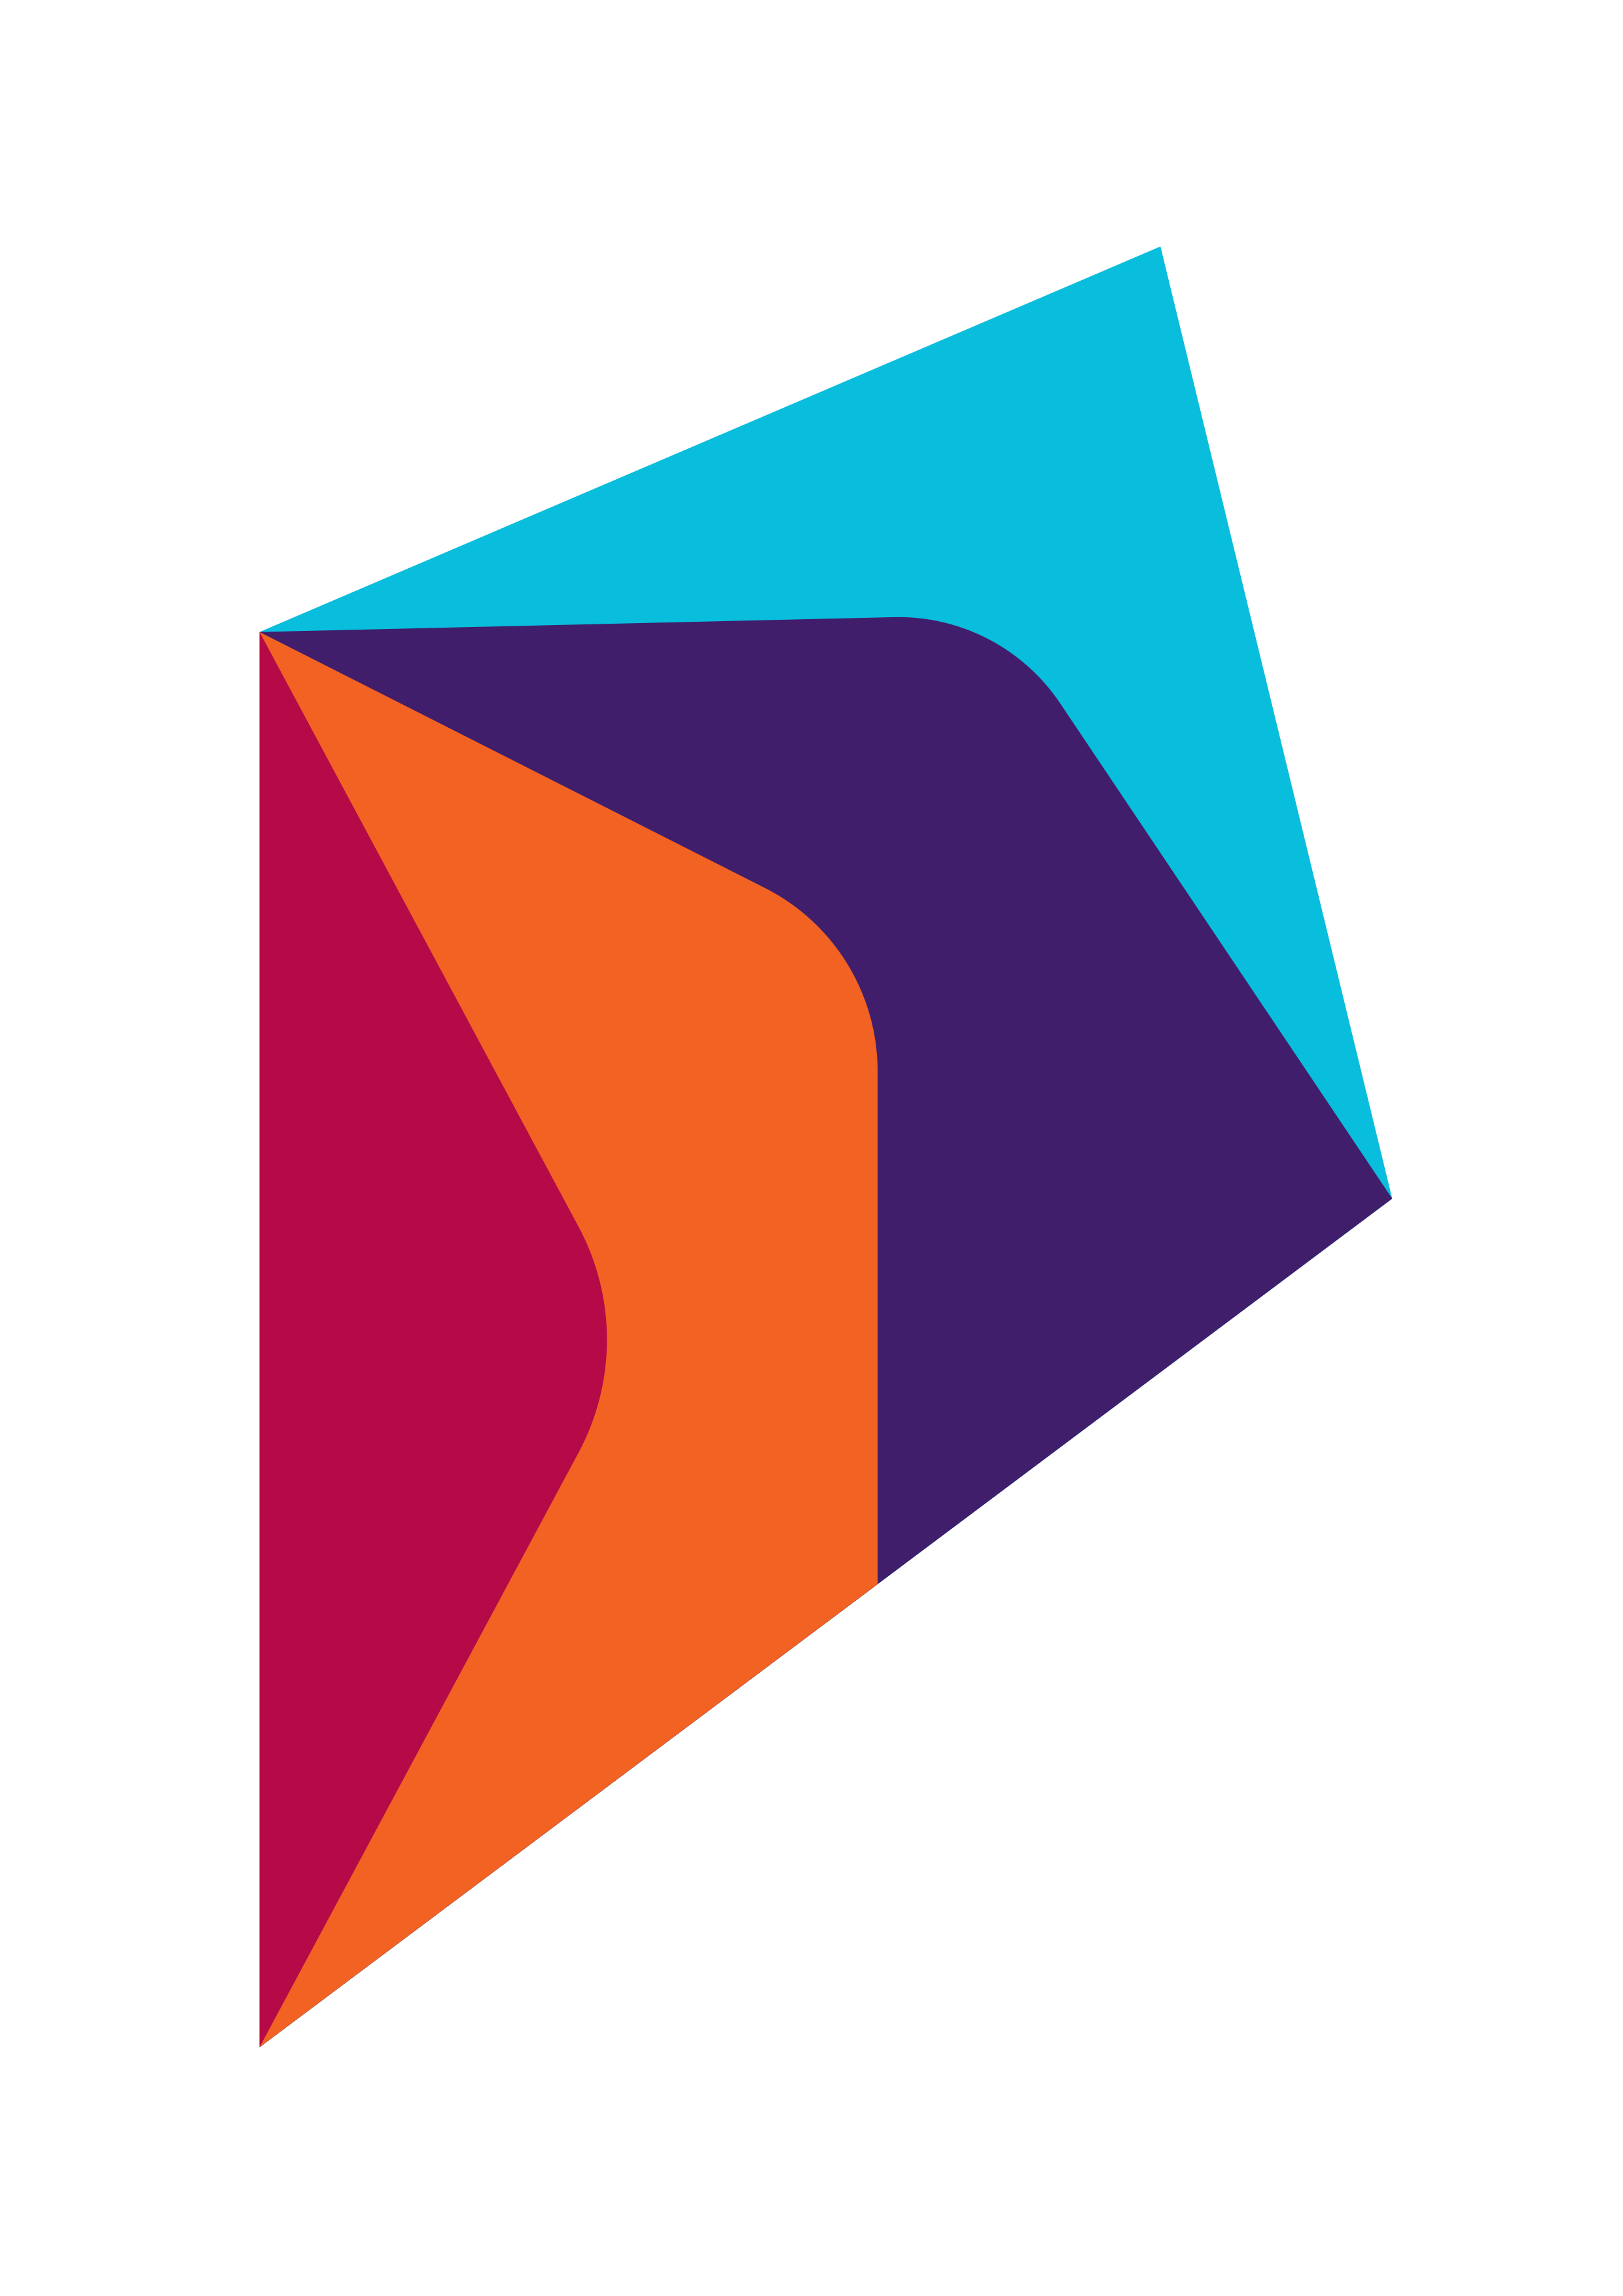 Icon of kite in colours maroon, orange, purple and blue.